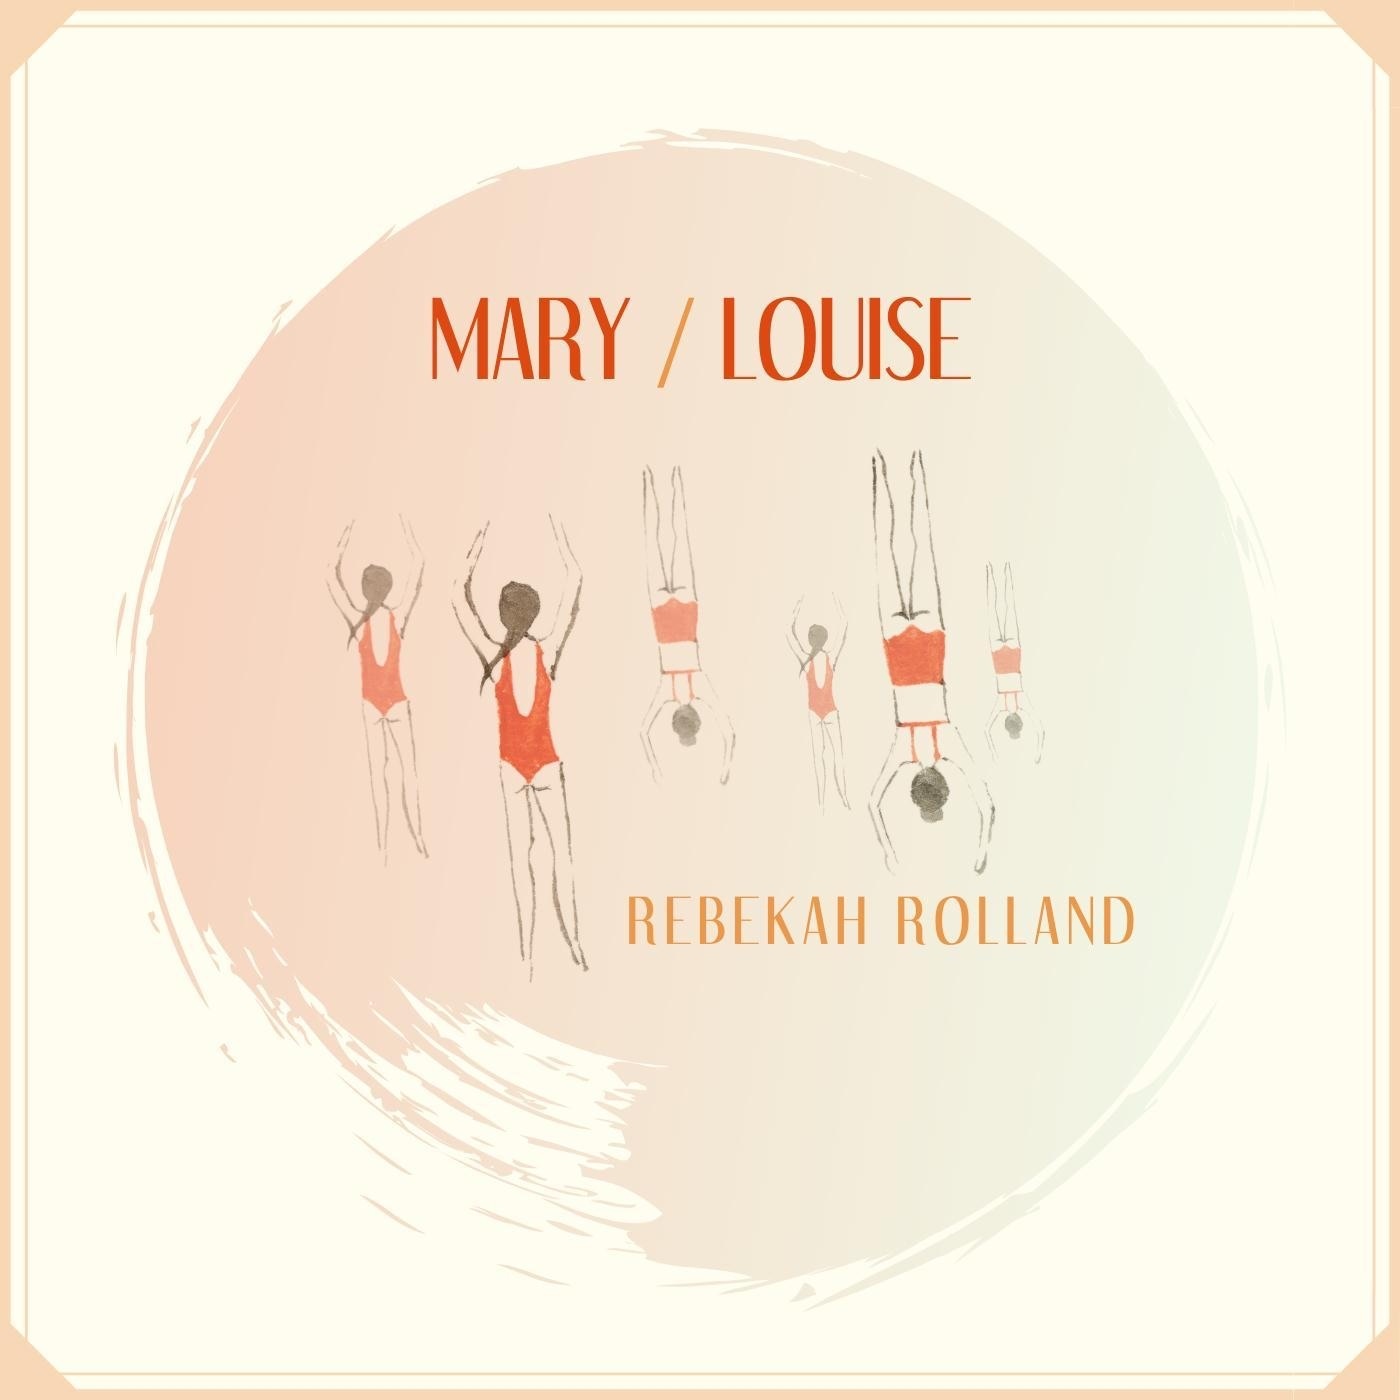 Mary / Louise